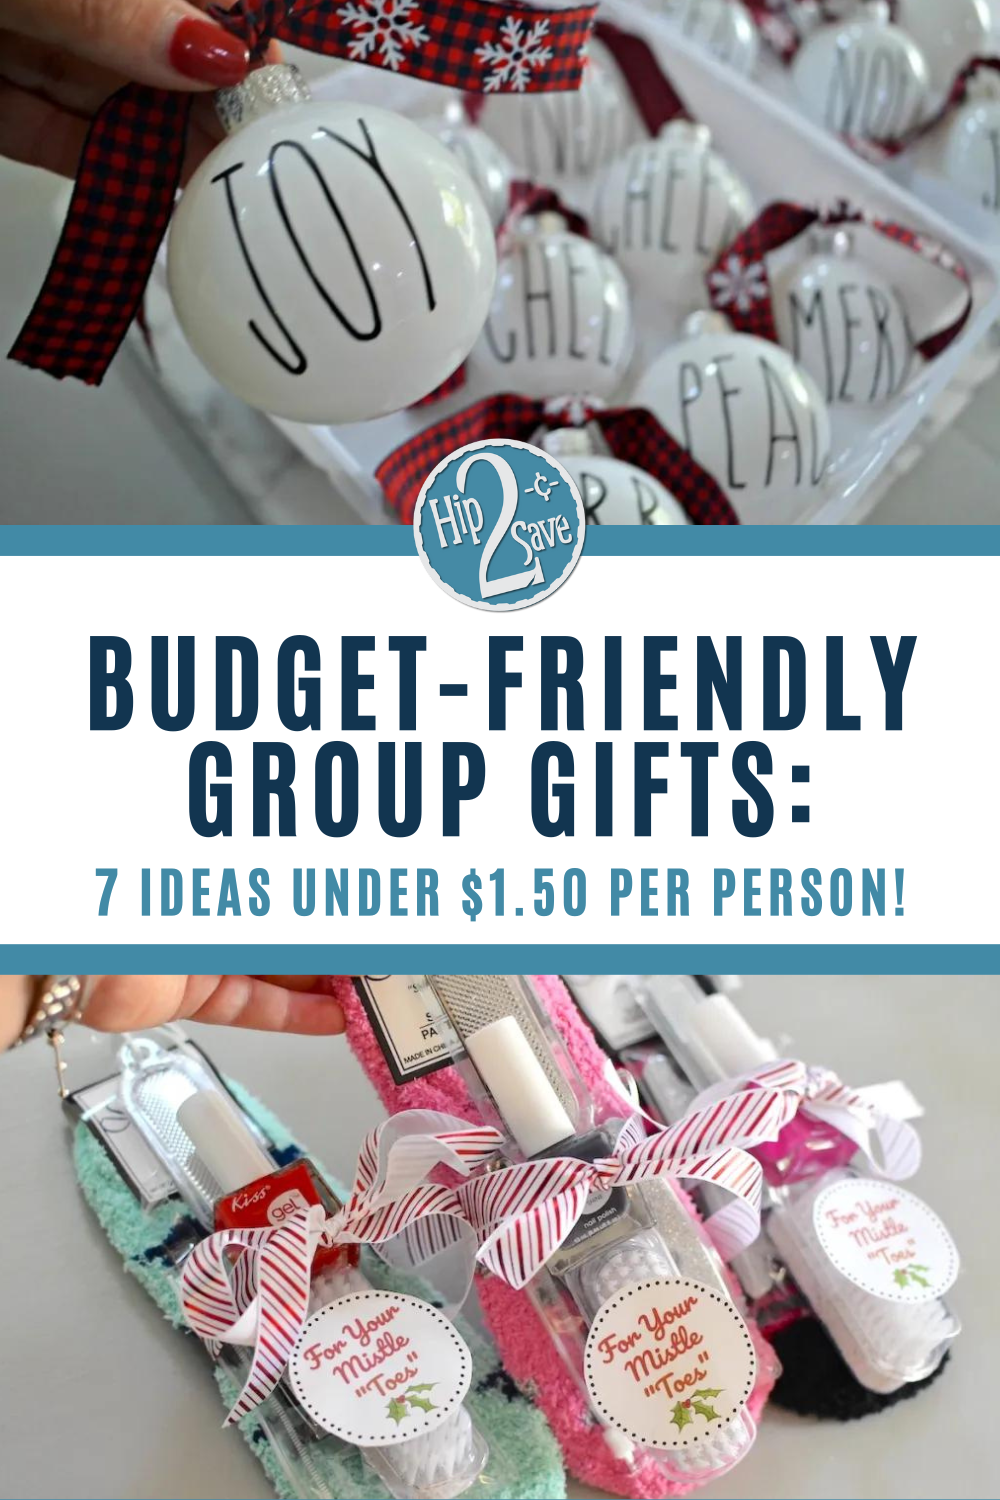 Group Bridal Shower Gift Ideas | GiftCrowd